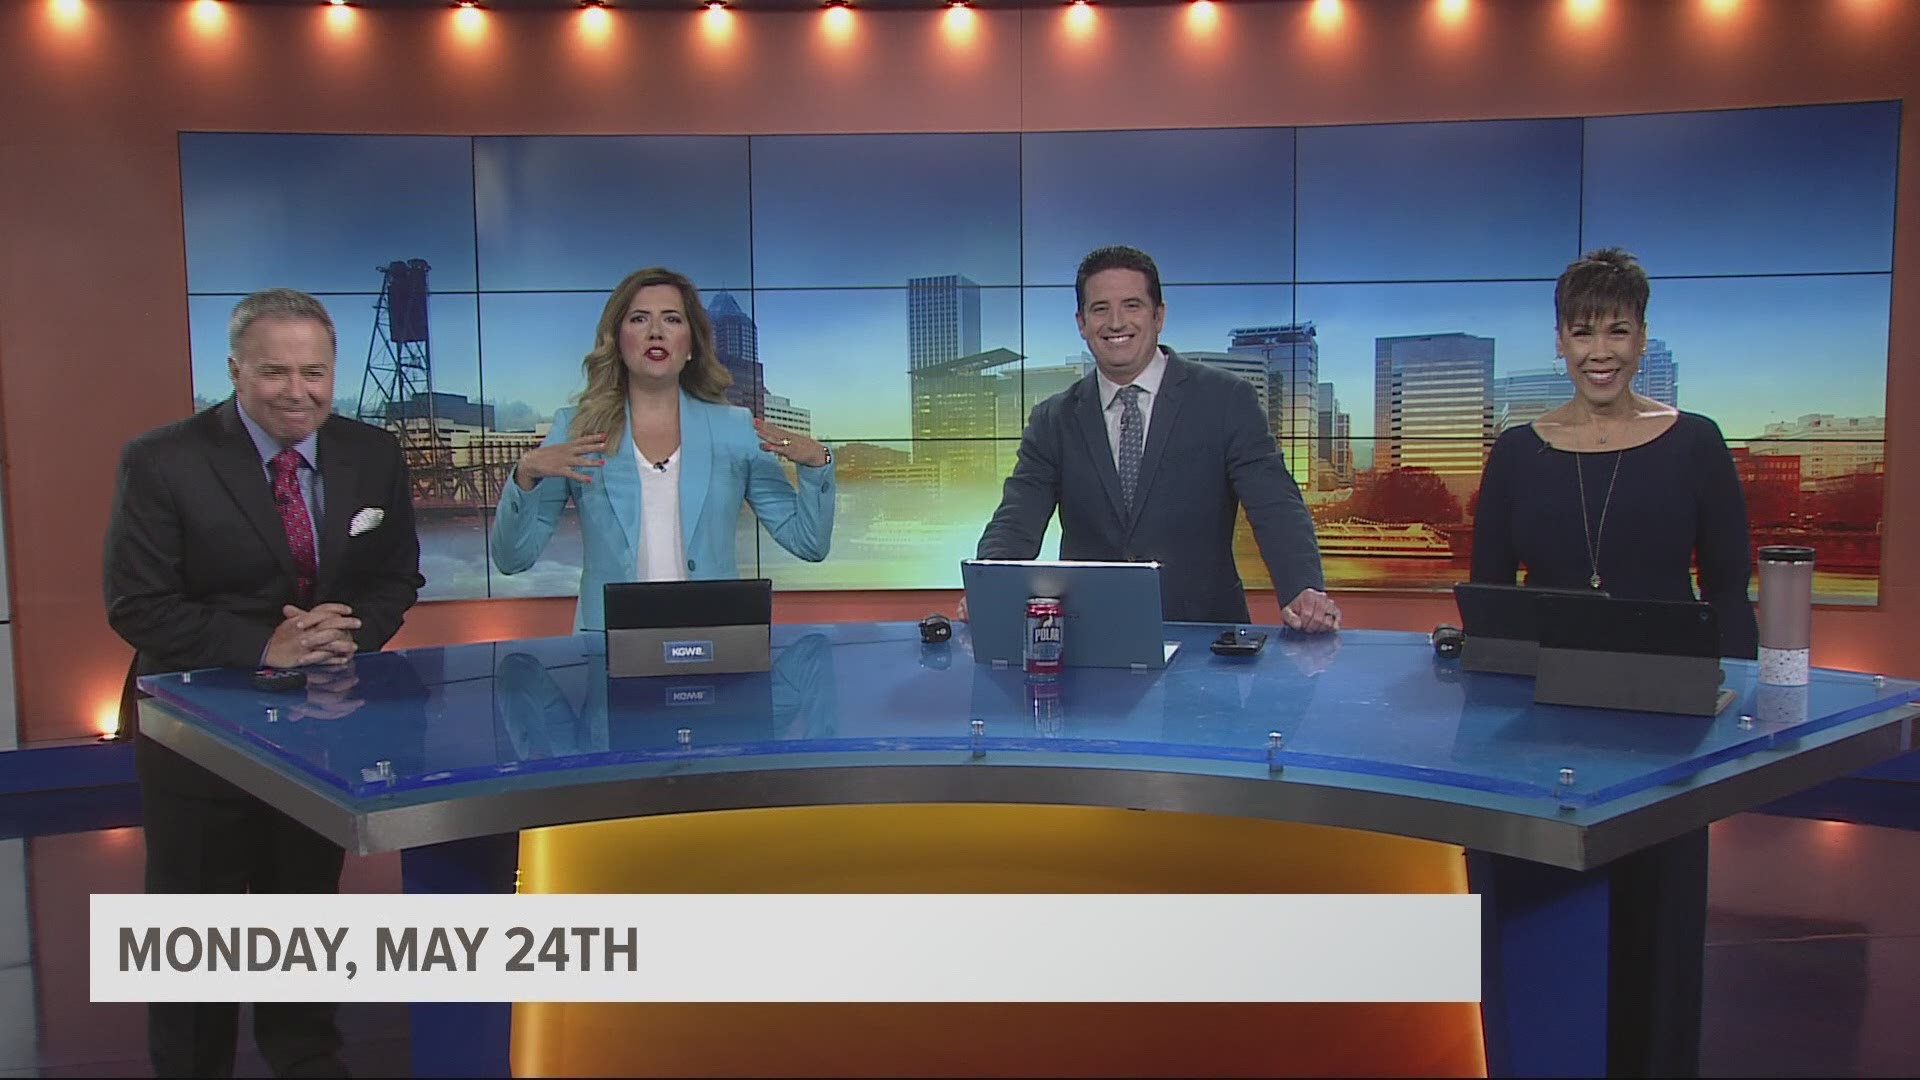 All the funniest moments from this week on KGW Sunrise.